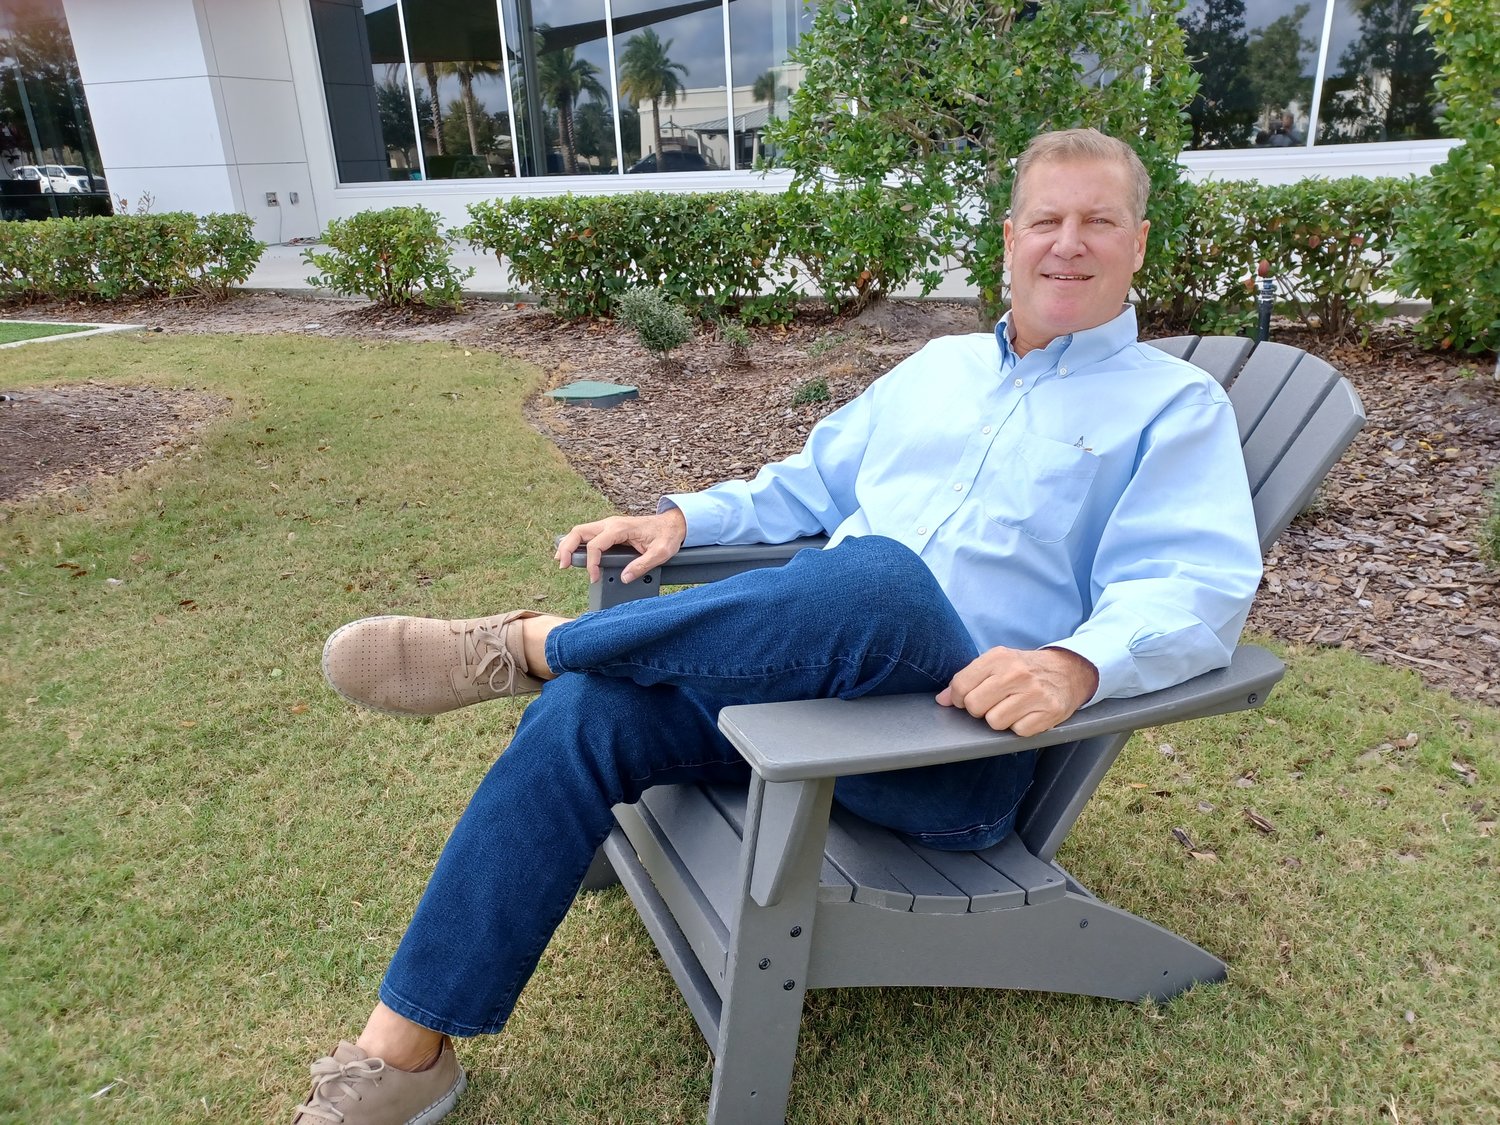 Steven Hertzberg relaxes outside the link where he maintains a dedicated desk for his business.